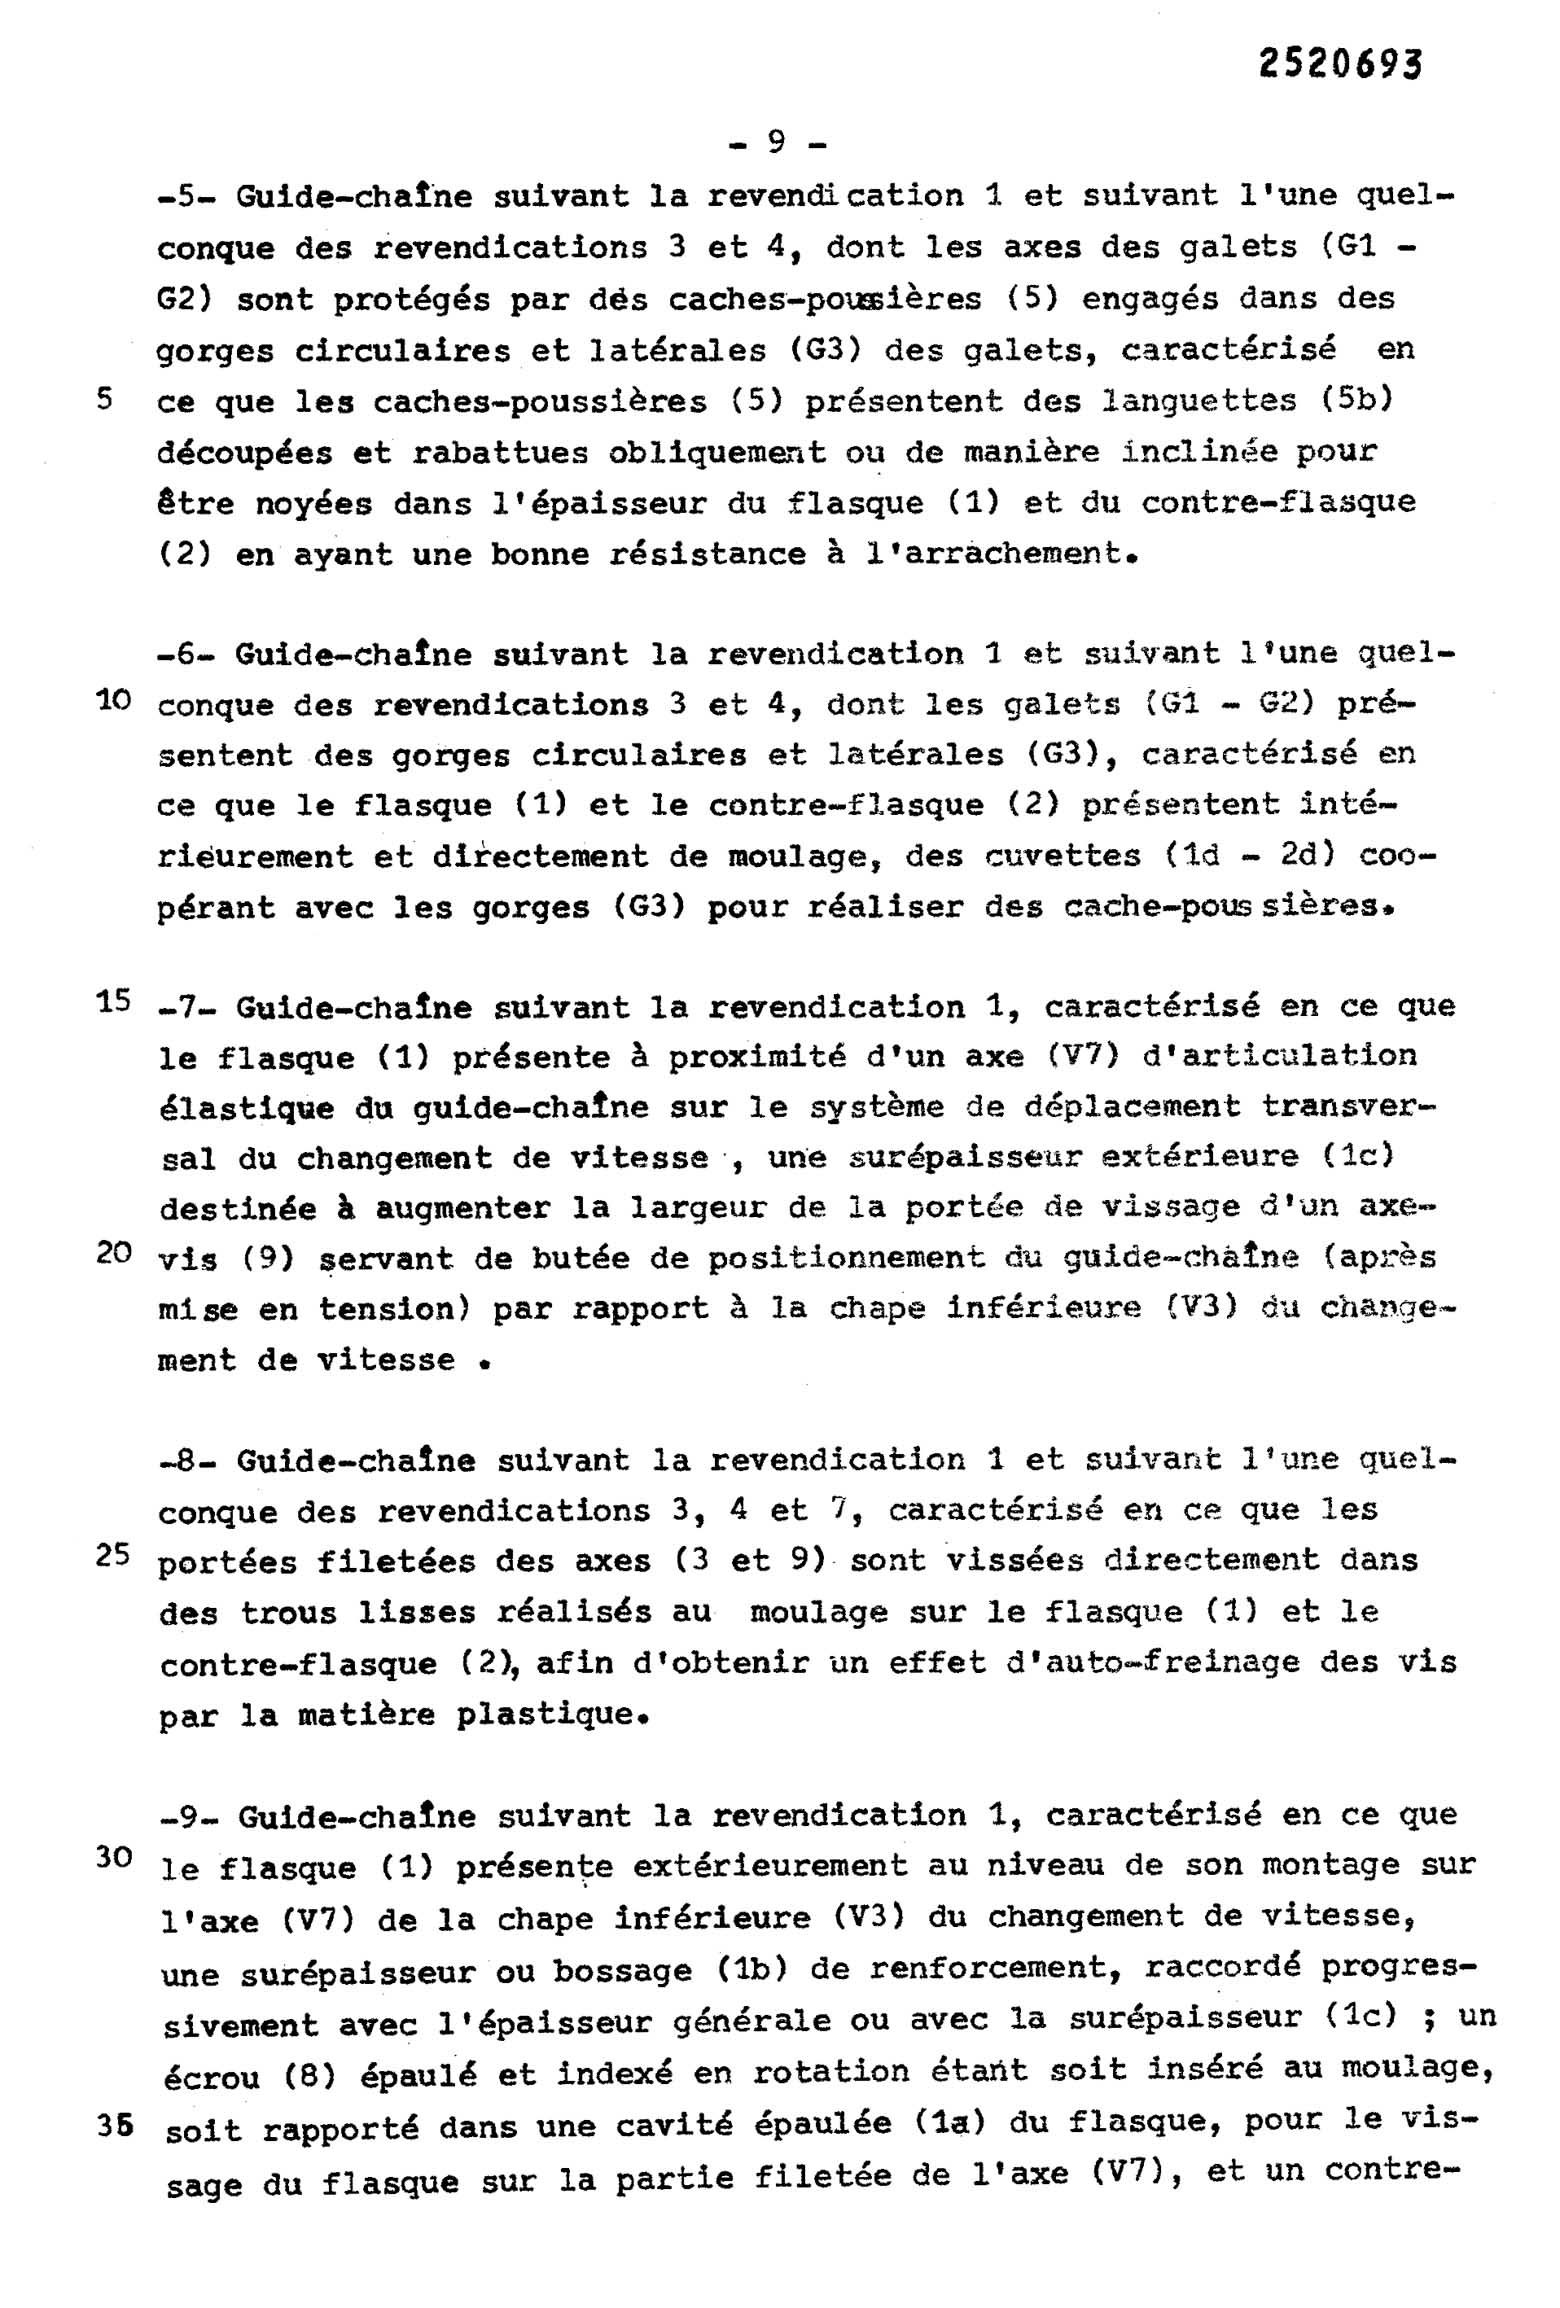 French Patent 2,520,693 - Simplex scan 010 main image